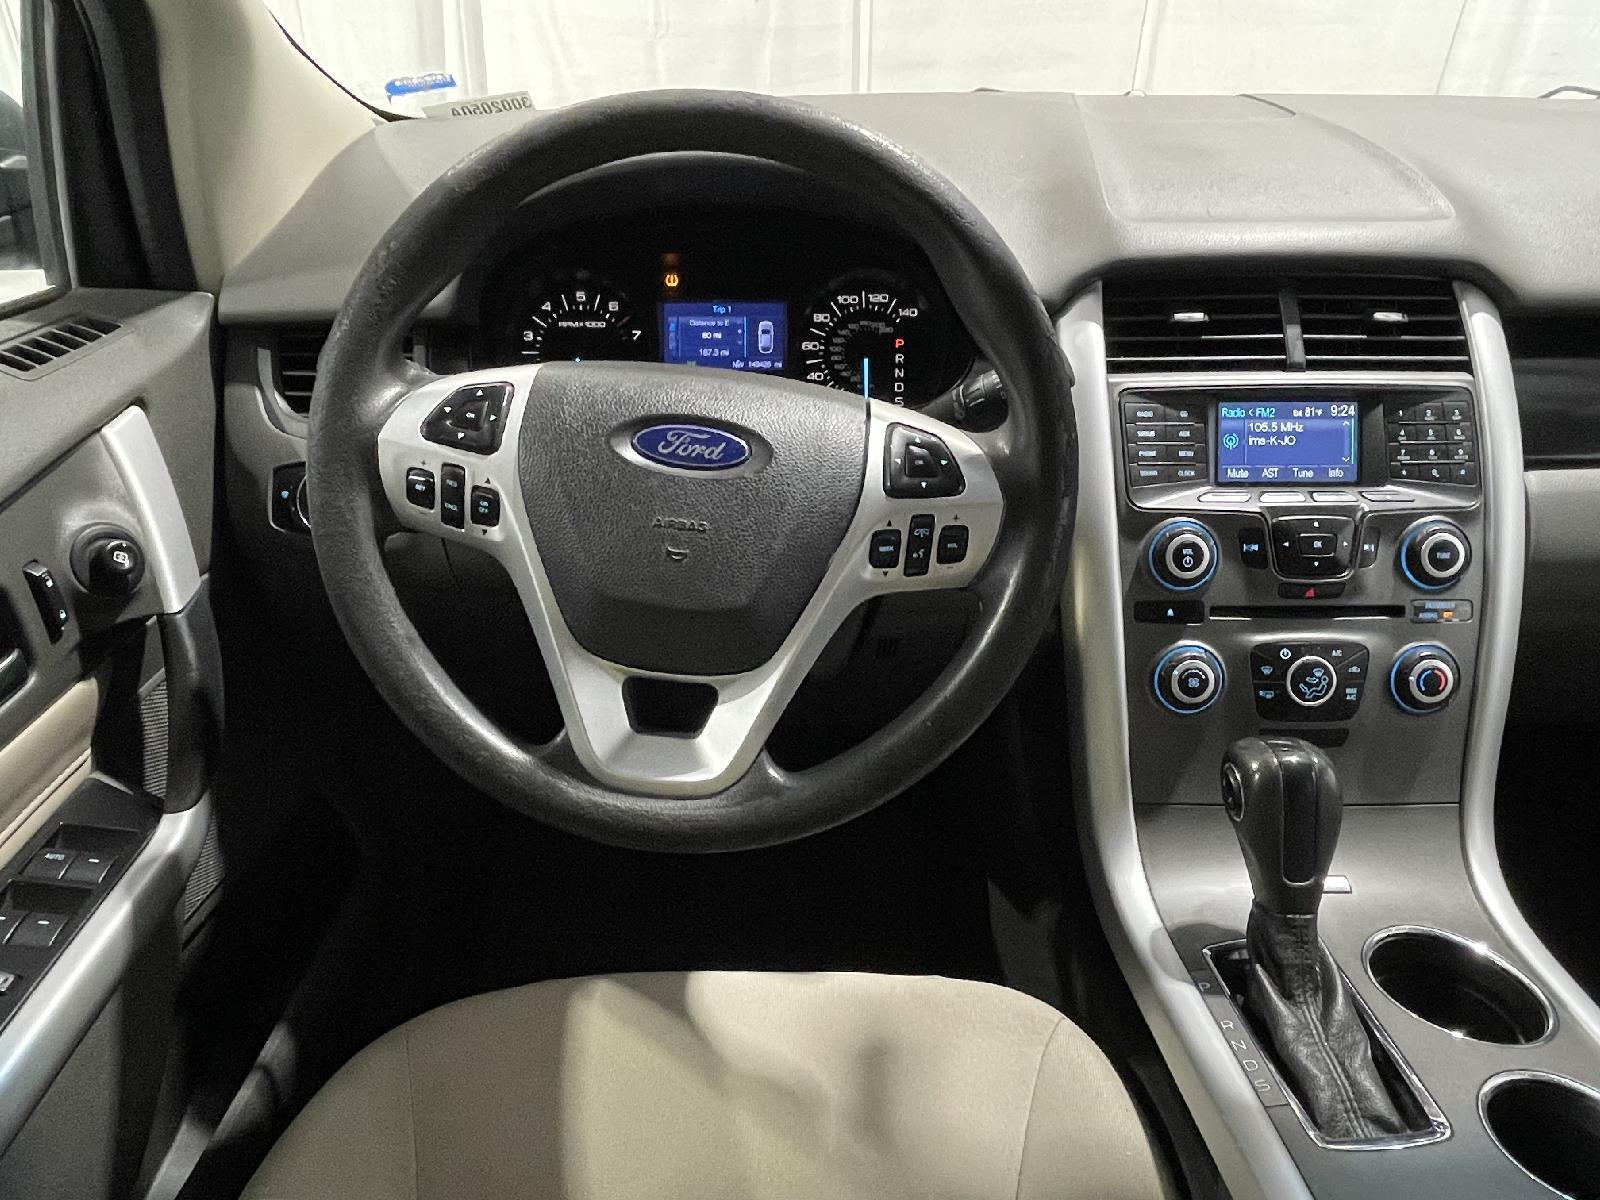 Used 2013 Ford Edge SE SUV for sale in St Joseph MO